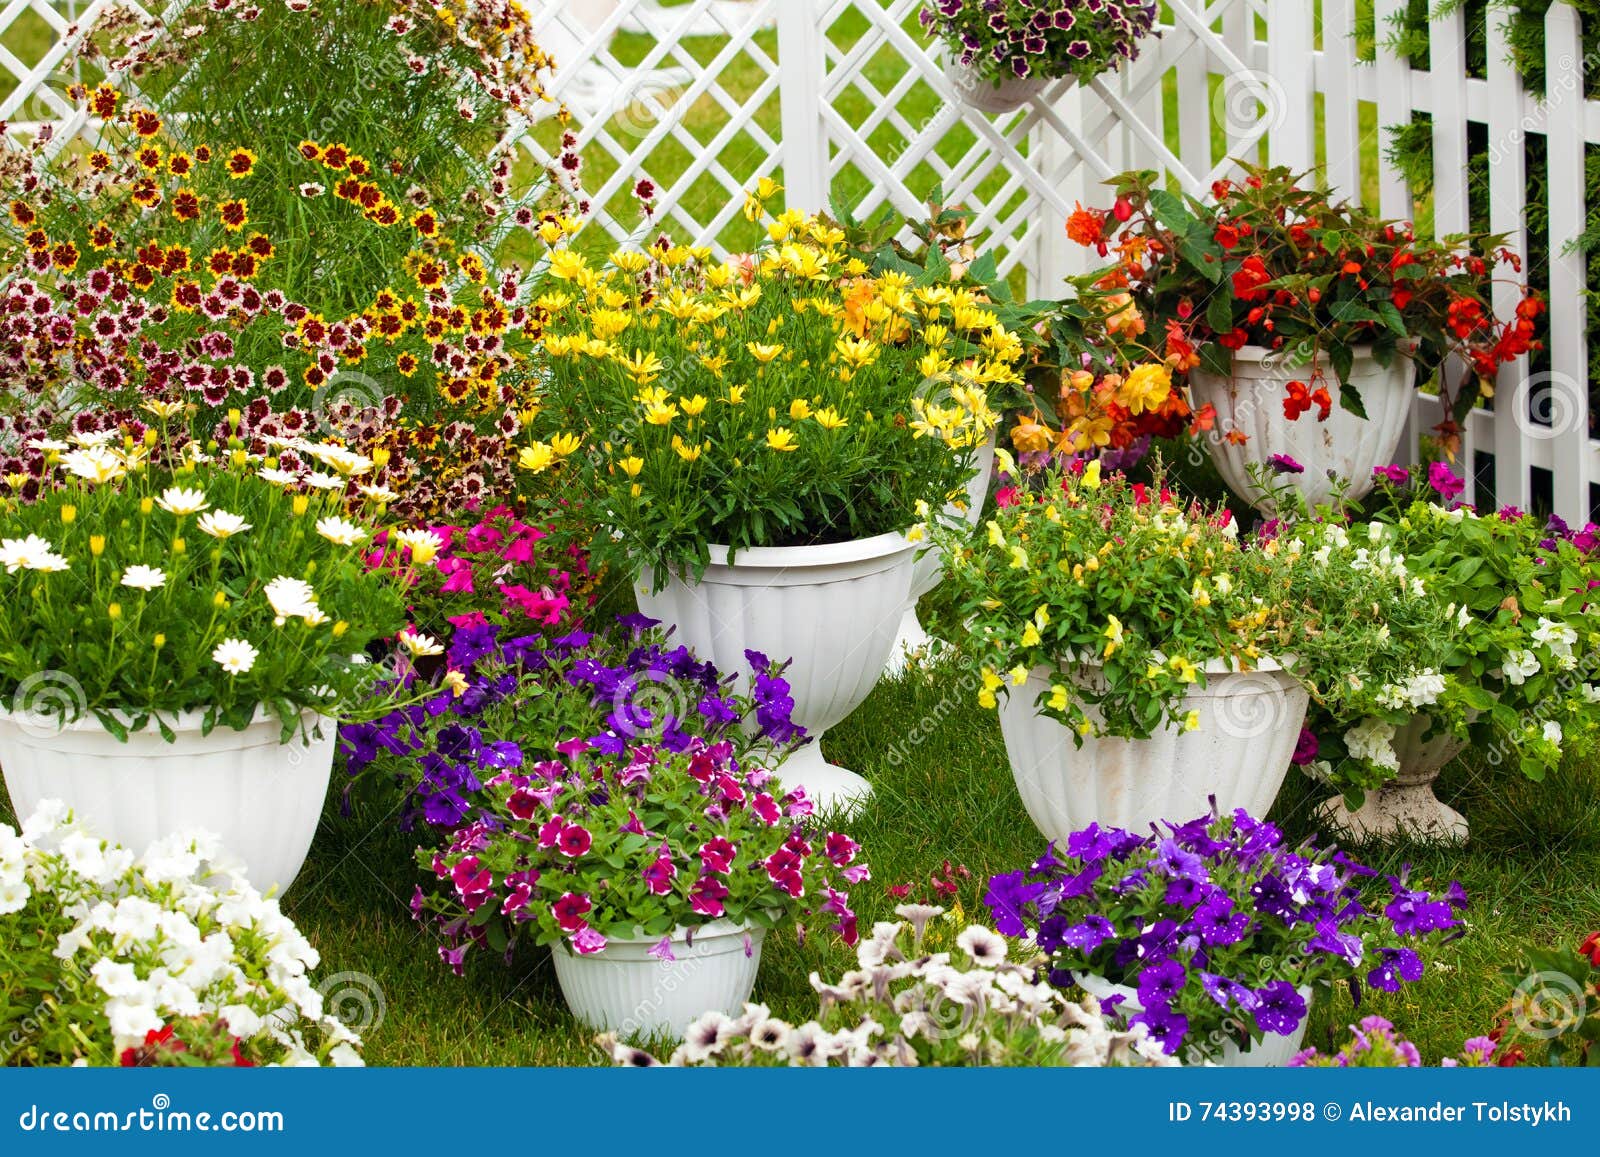  Garden  Flowers Of Different Colors In Pots  Stock Photo 